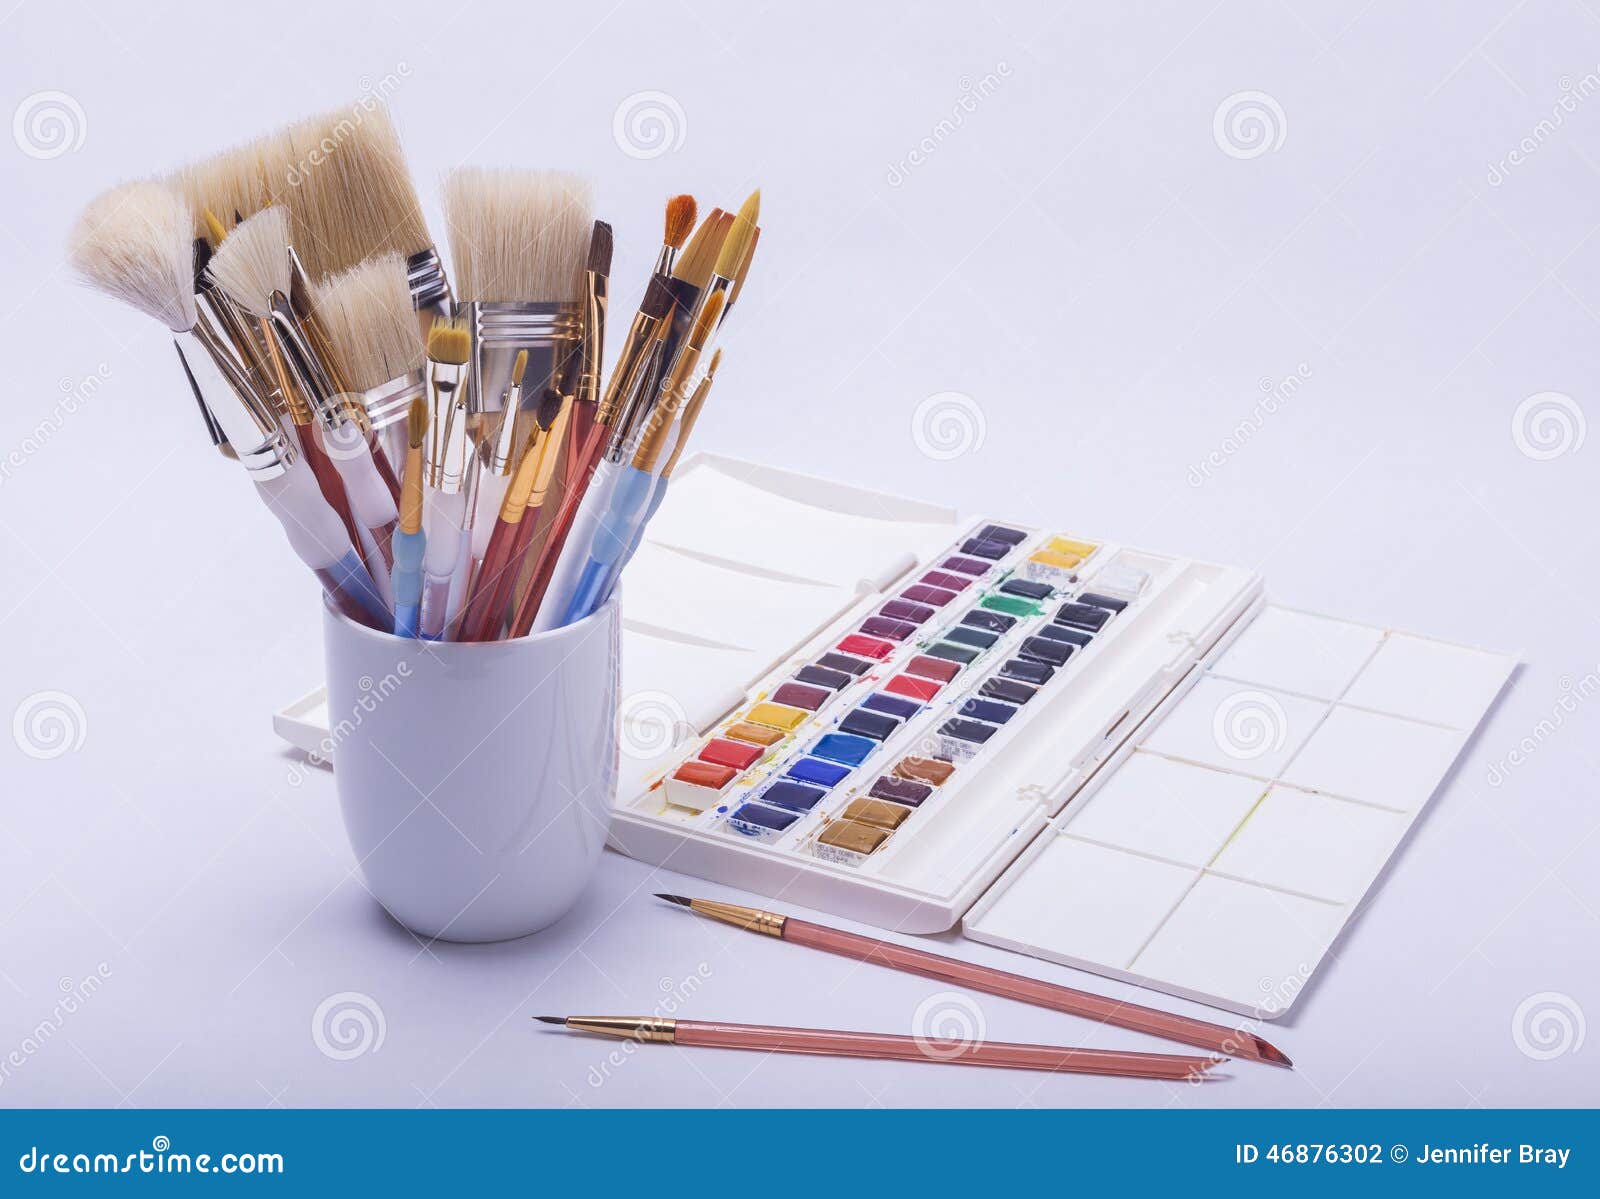 artists painting and drawing materials